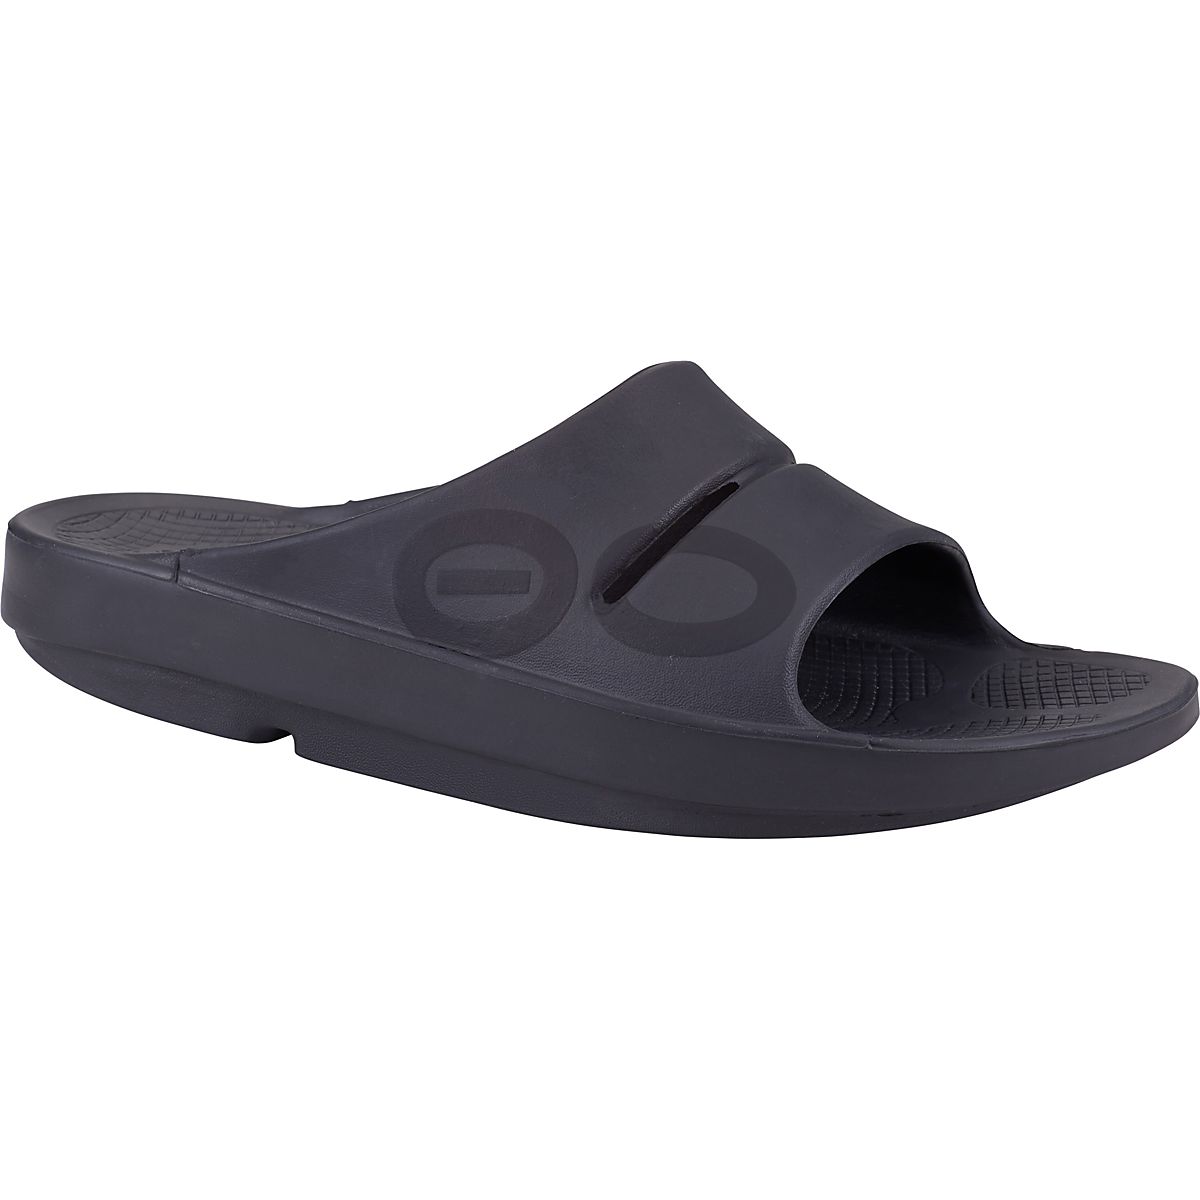 OOFOS Men's Ooahh Sport Slide Sandals | Free Shipping at Academy